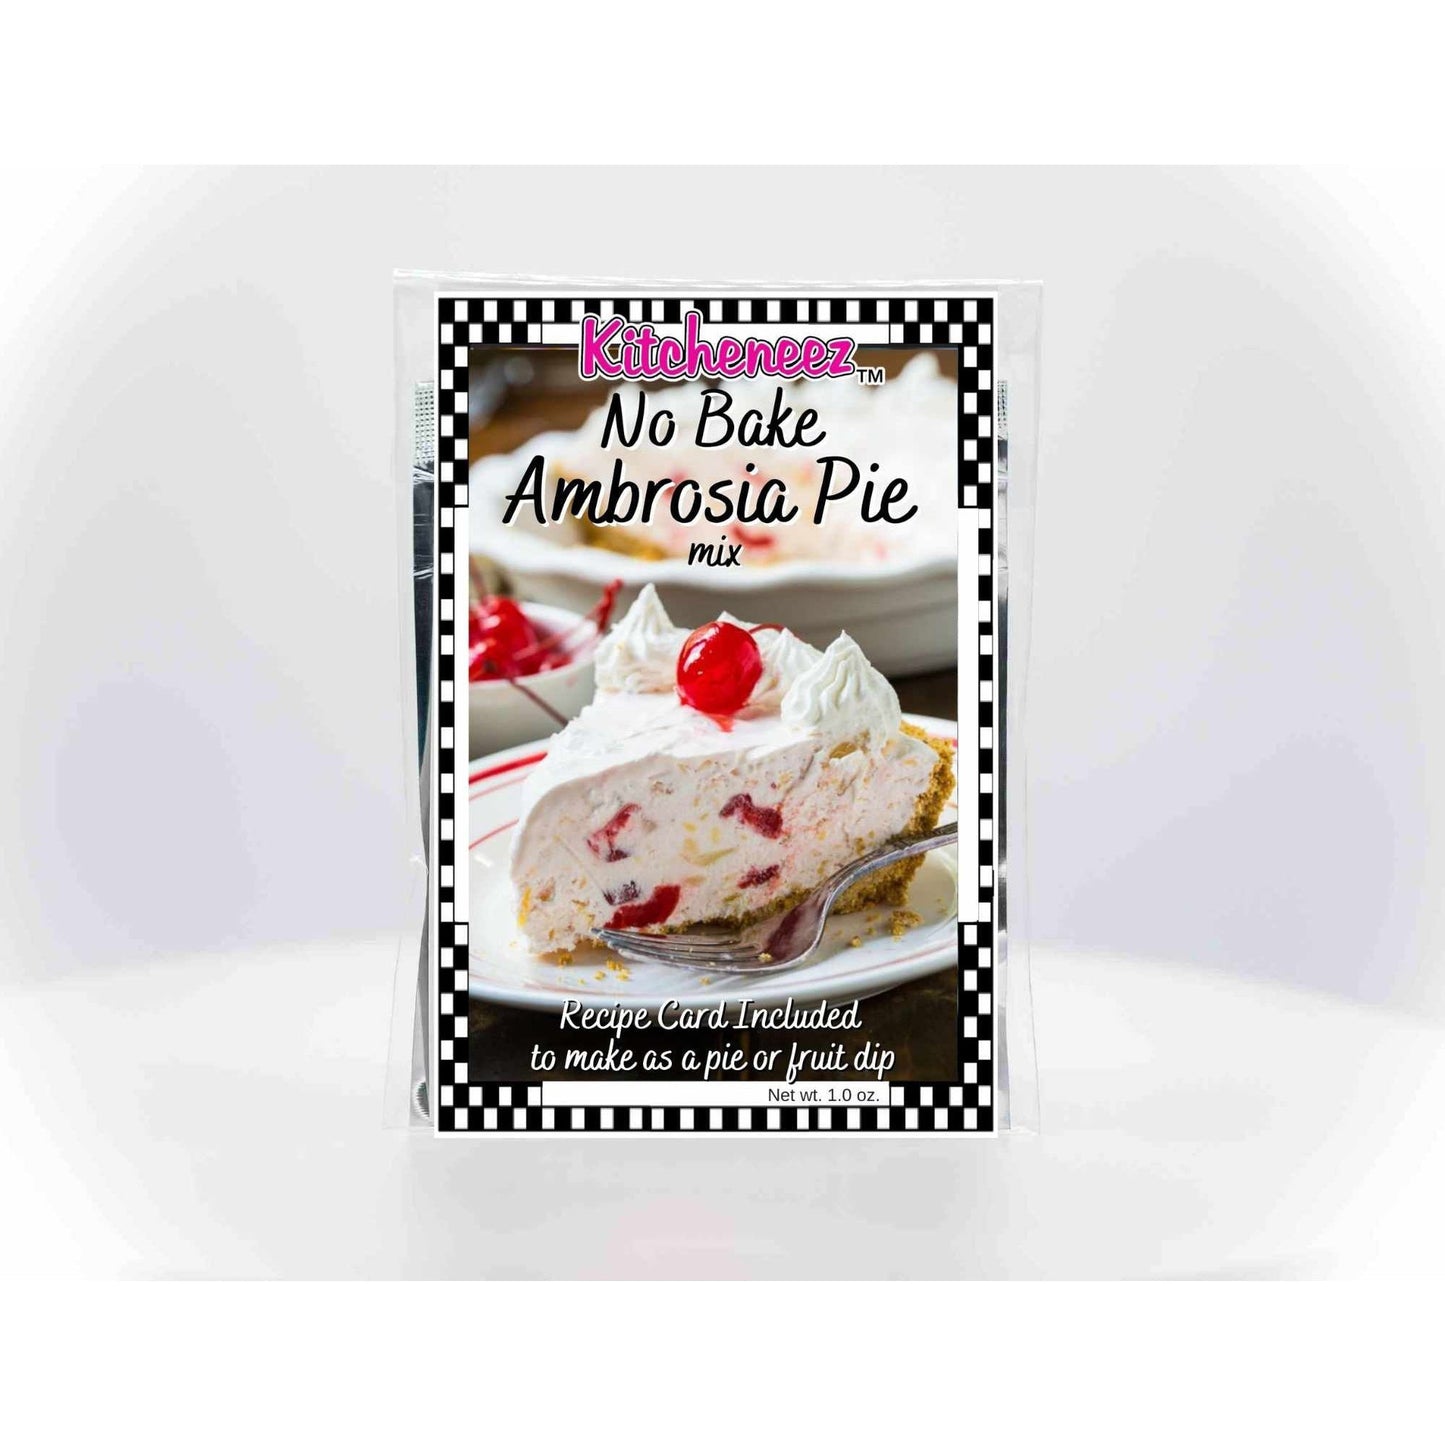 No Bake Ambrosia Pie with Quick Pie and Dip recipe included - Kitcheneez Mixes & More!